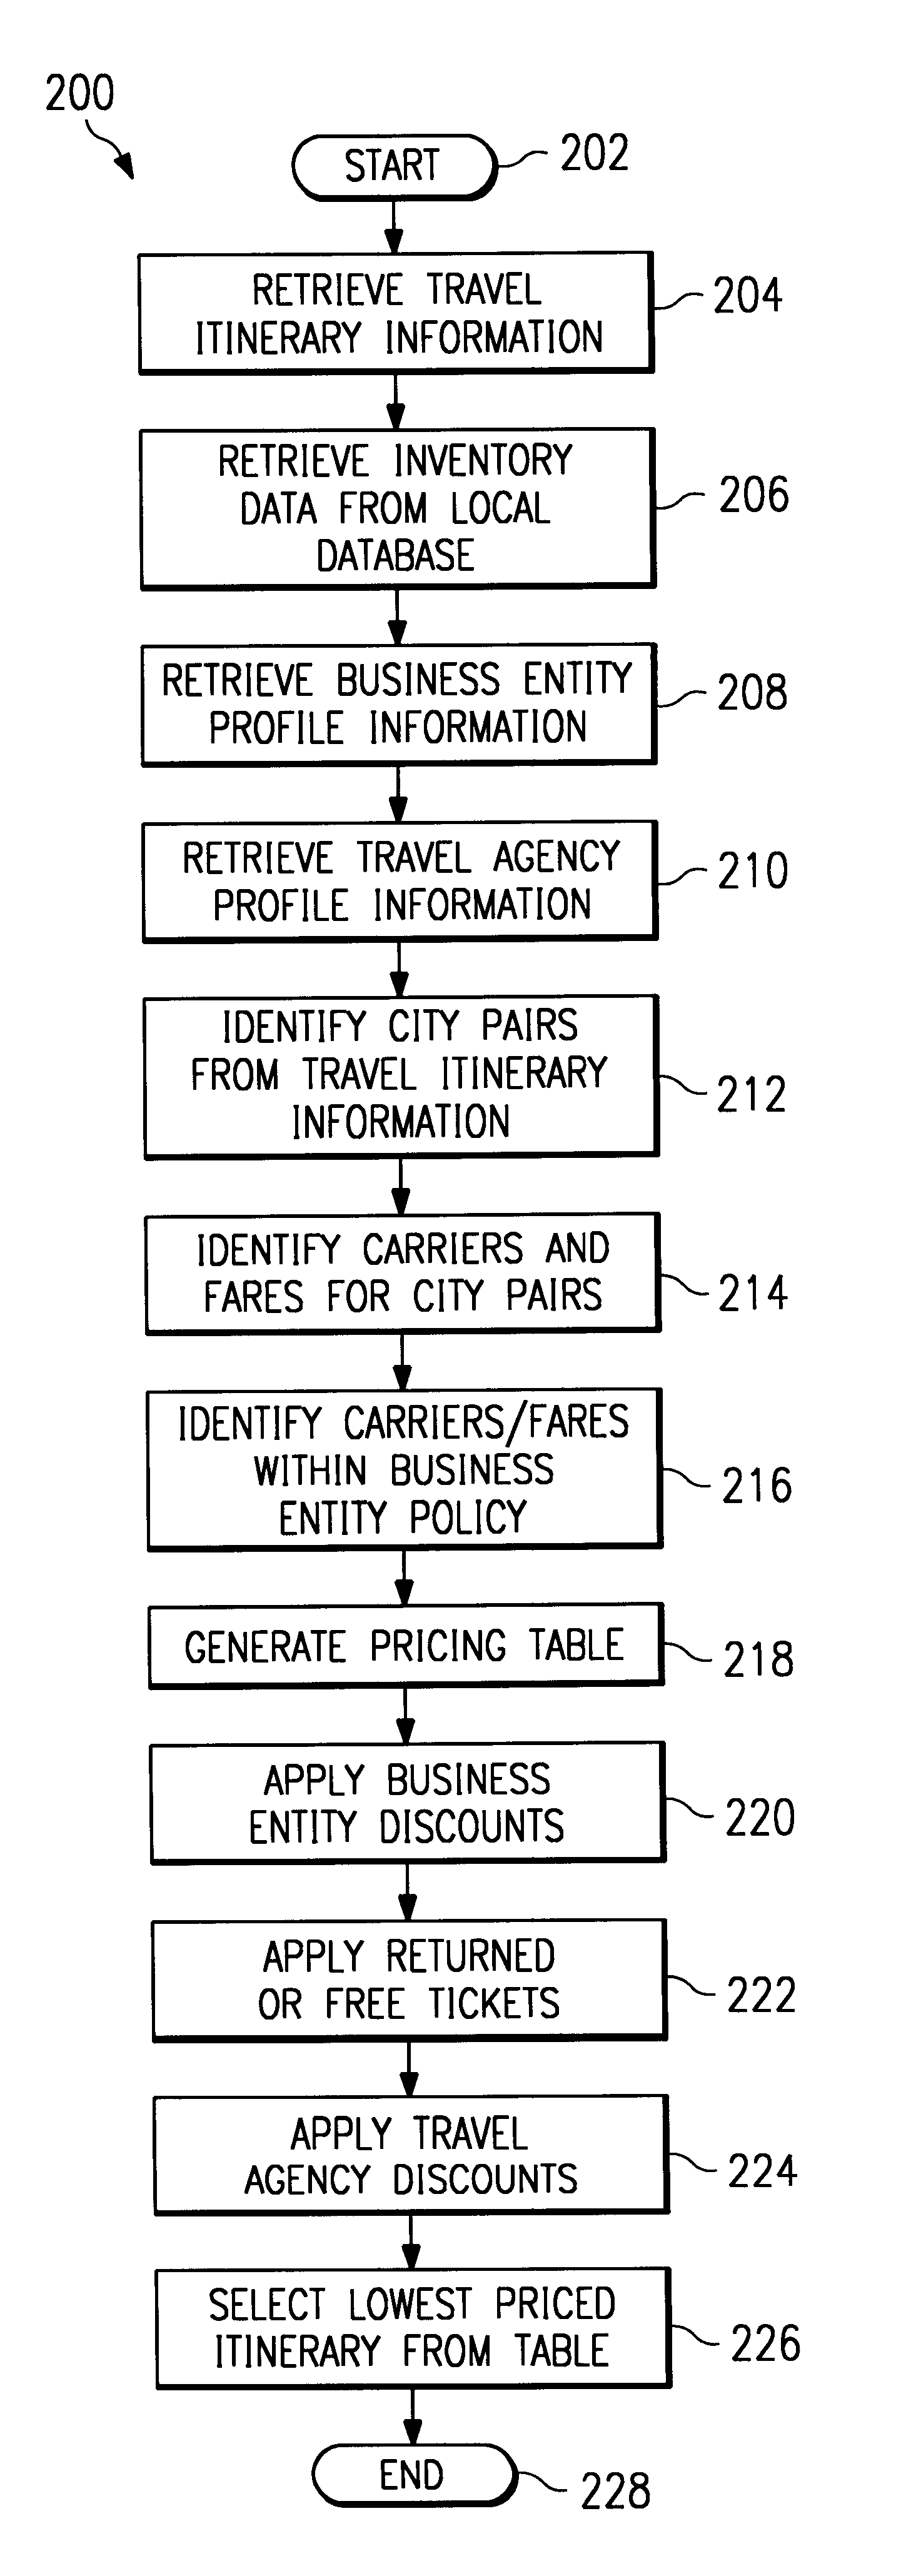 Automated travel pricing system